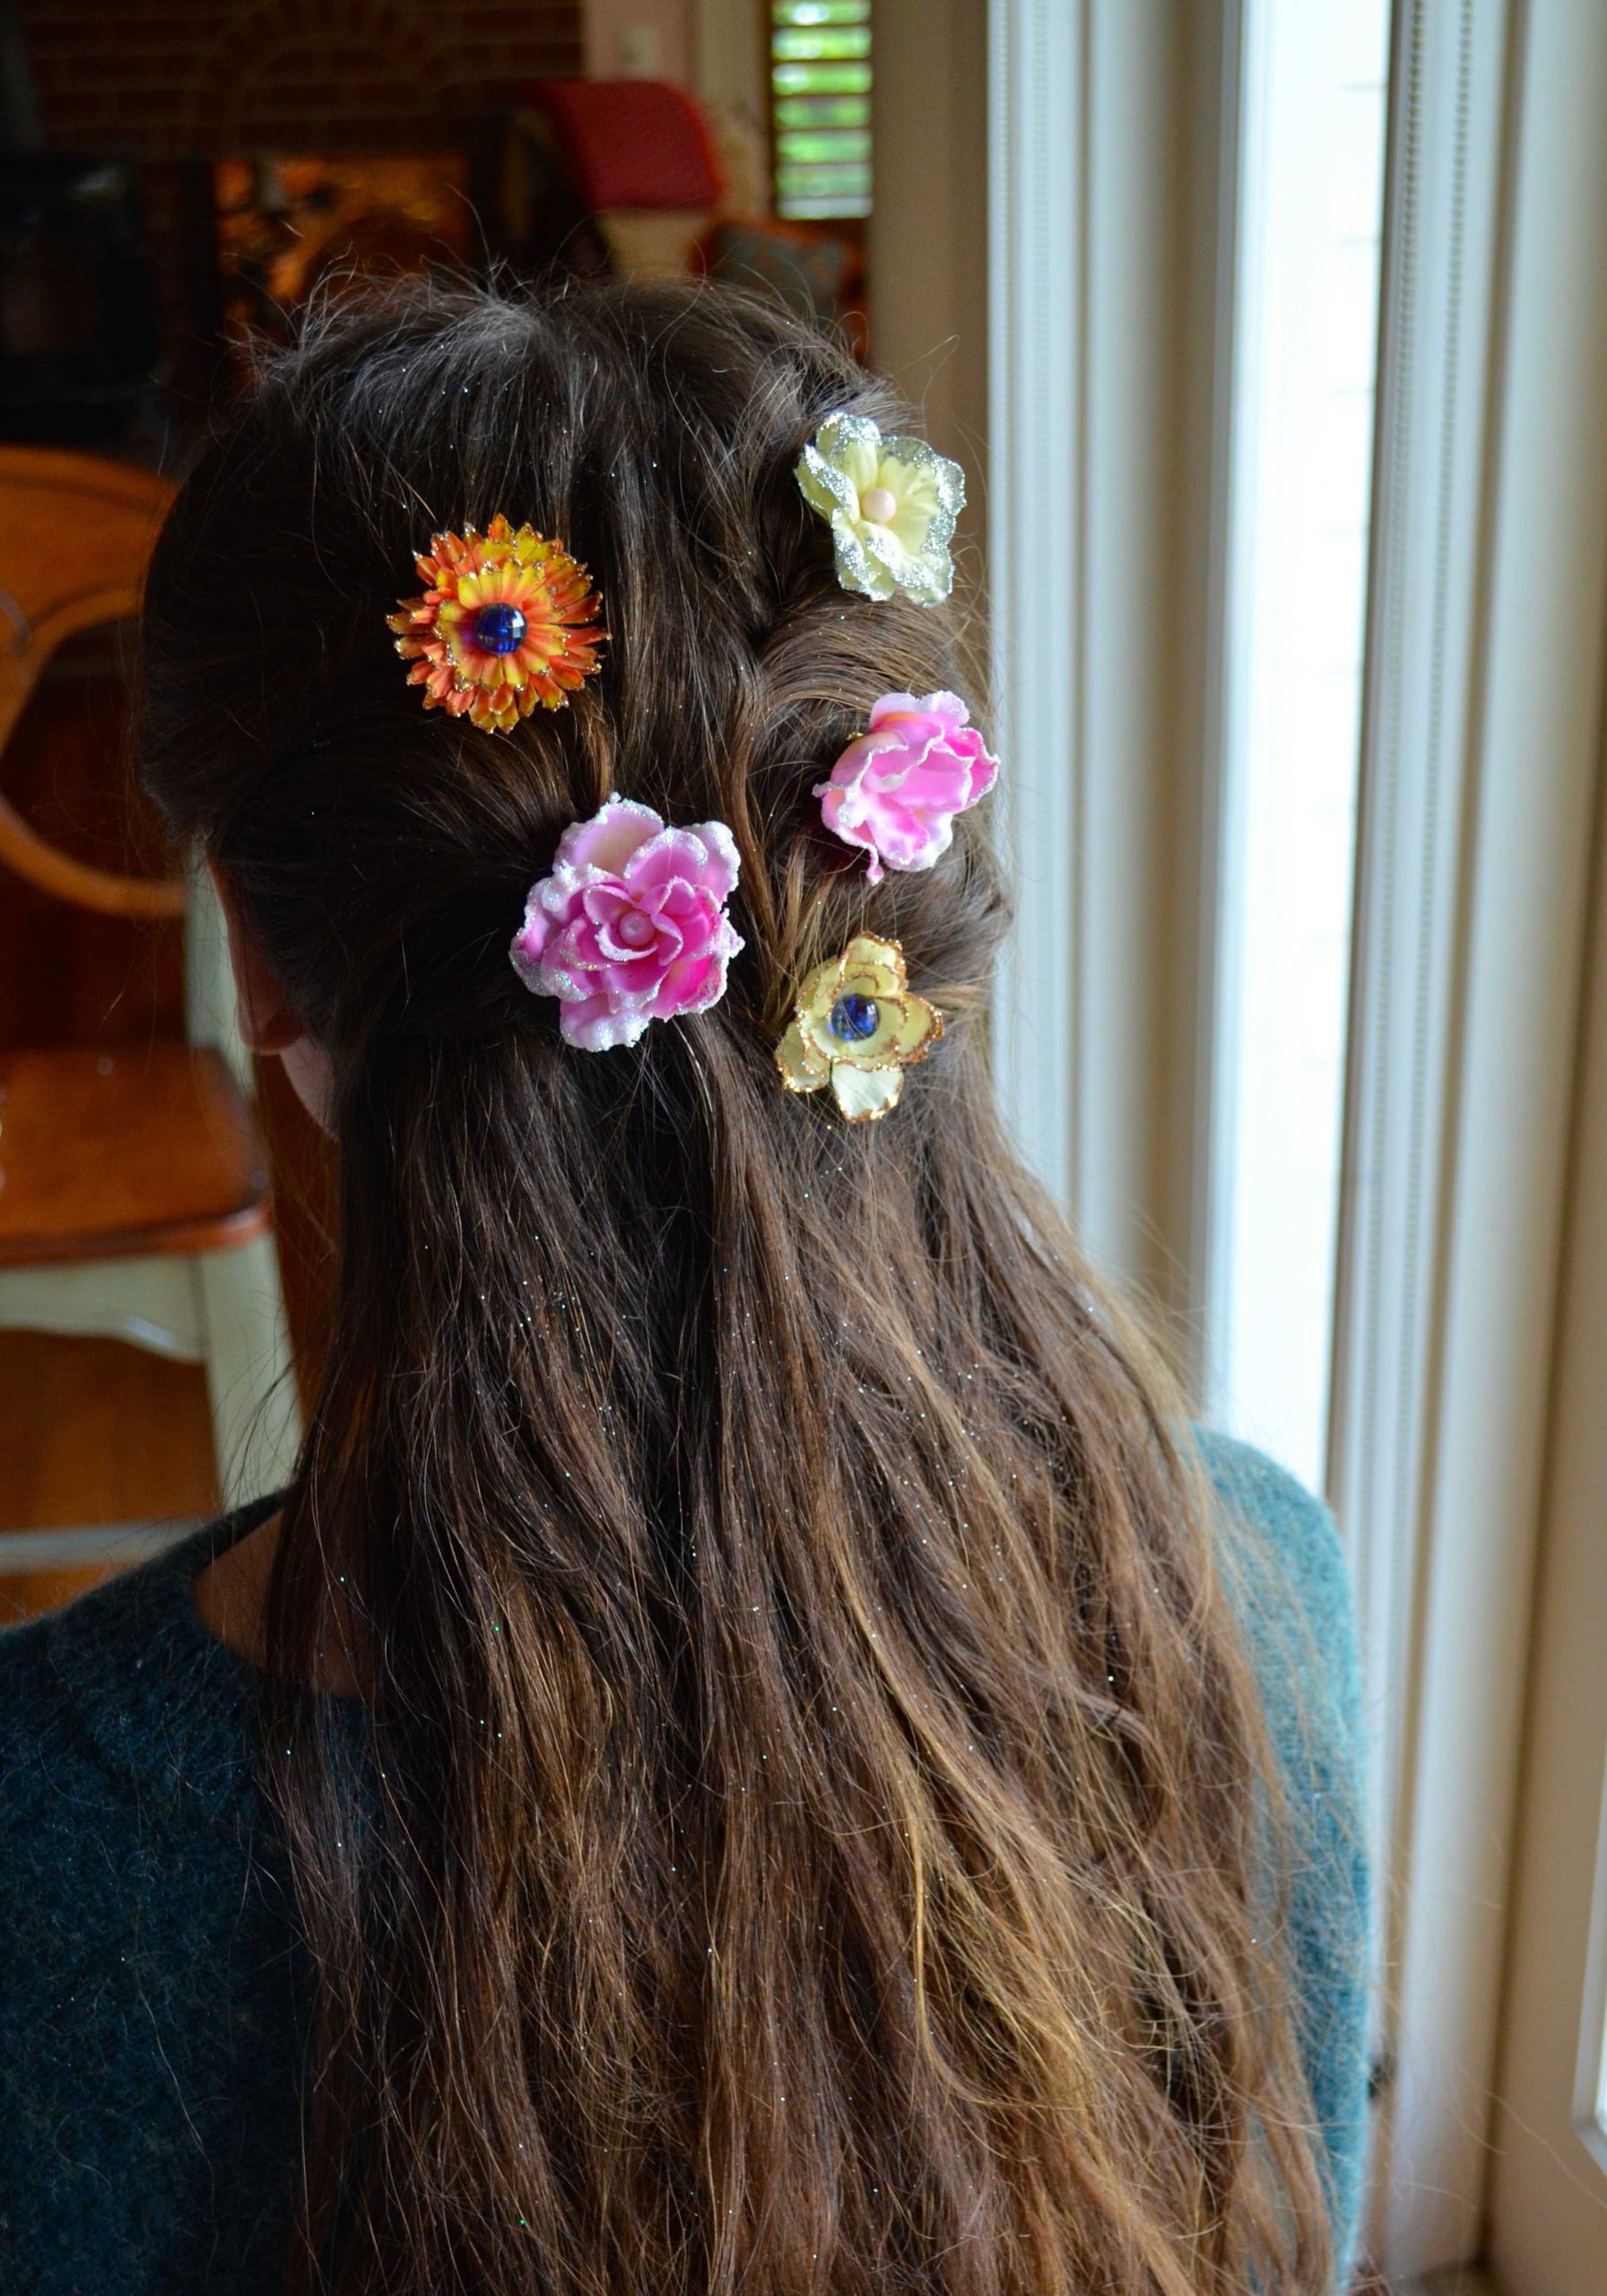 DIY Hair Accessories Ideas
 How to Make Flower Hair Accessories DIY Projects Craft